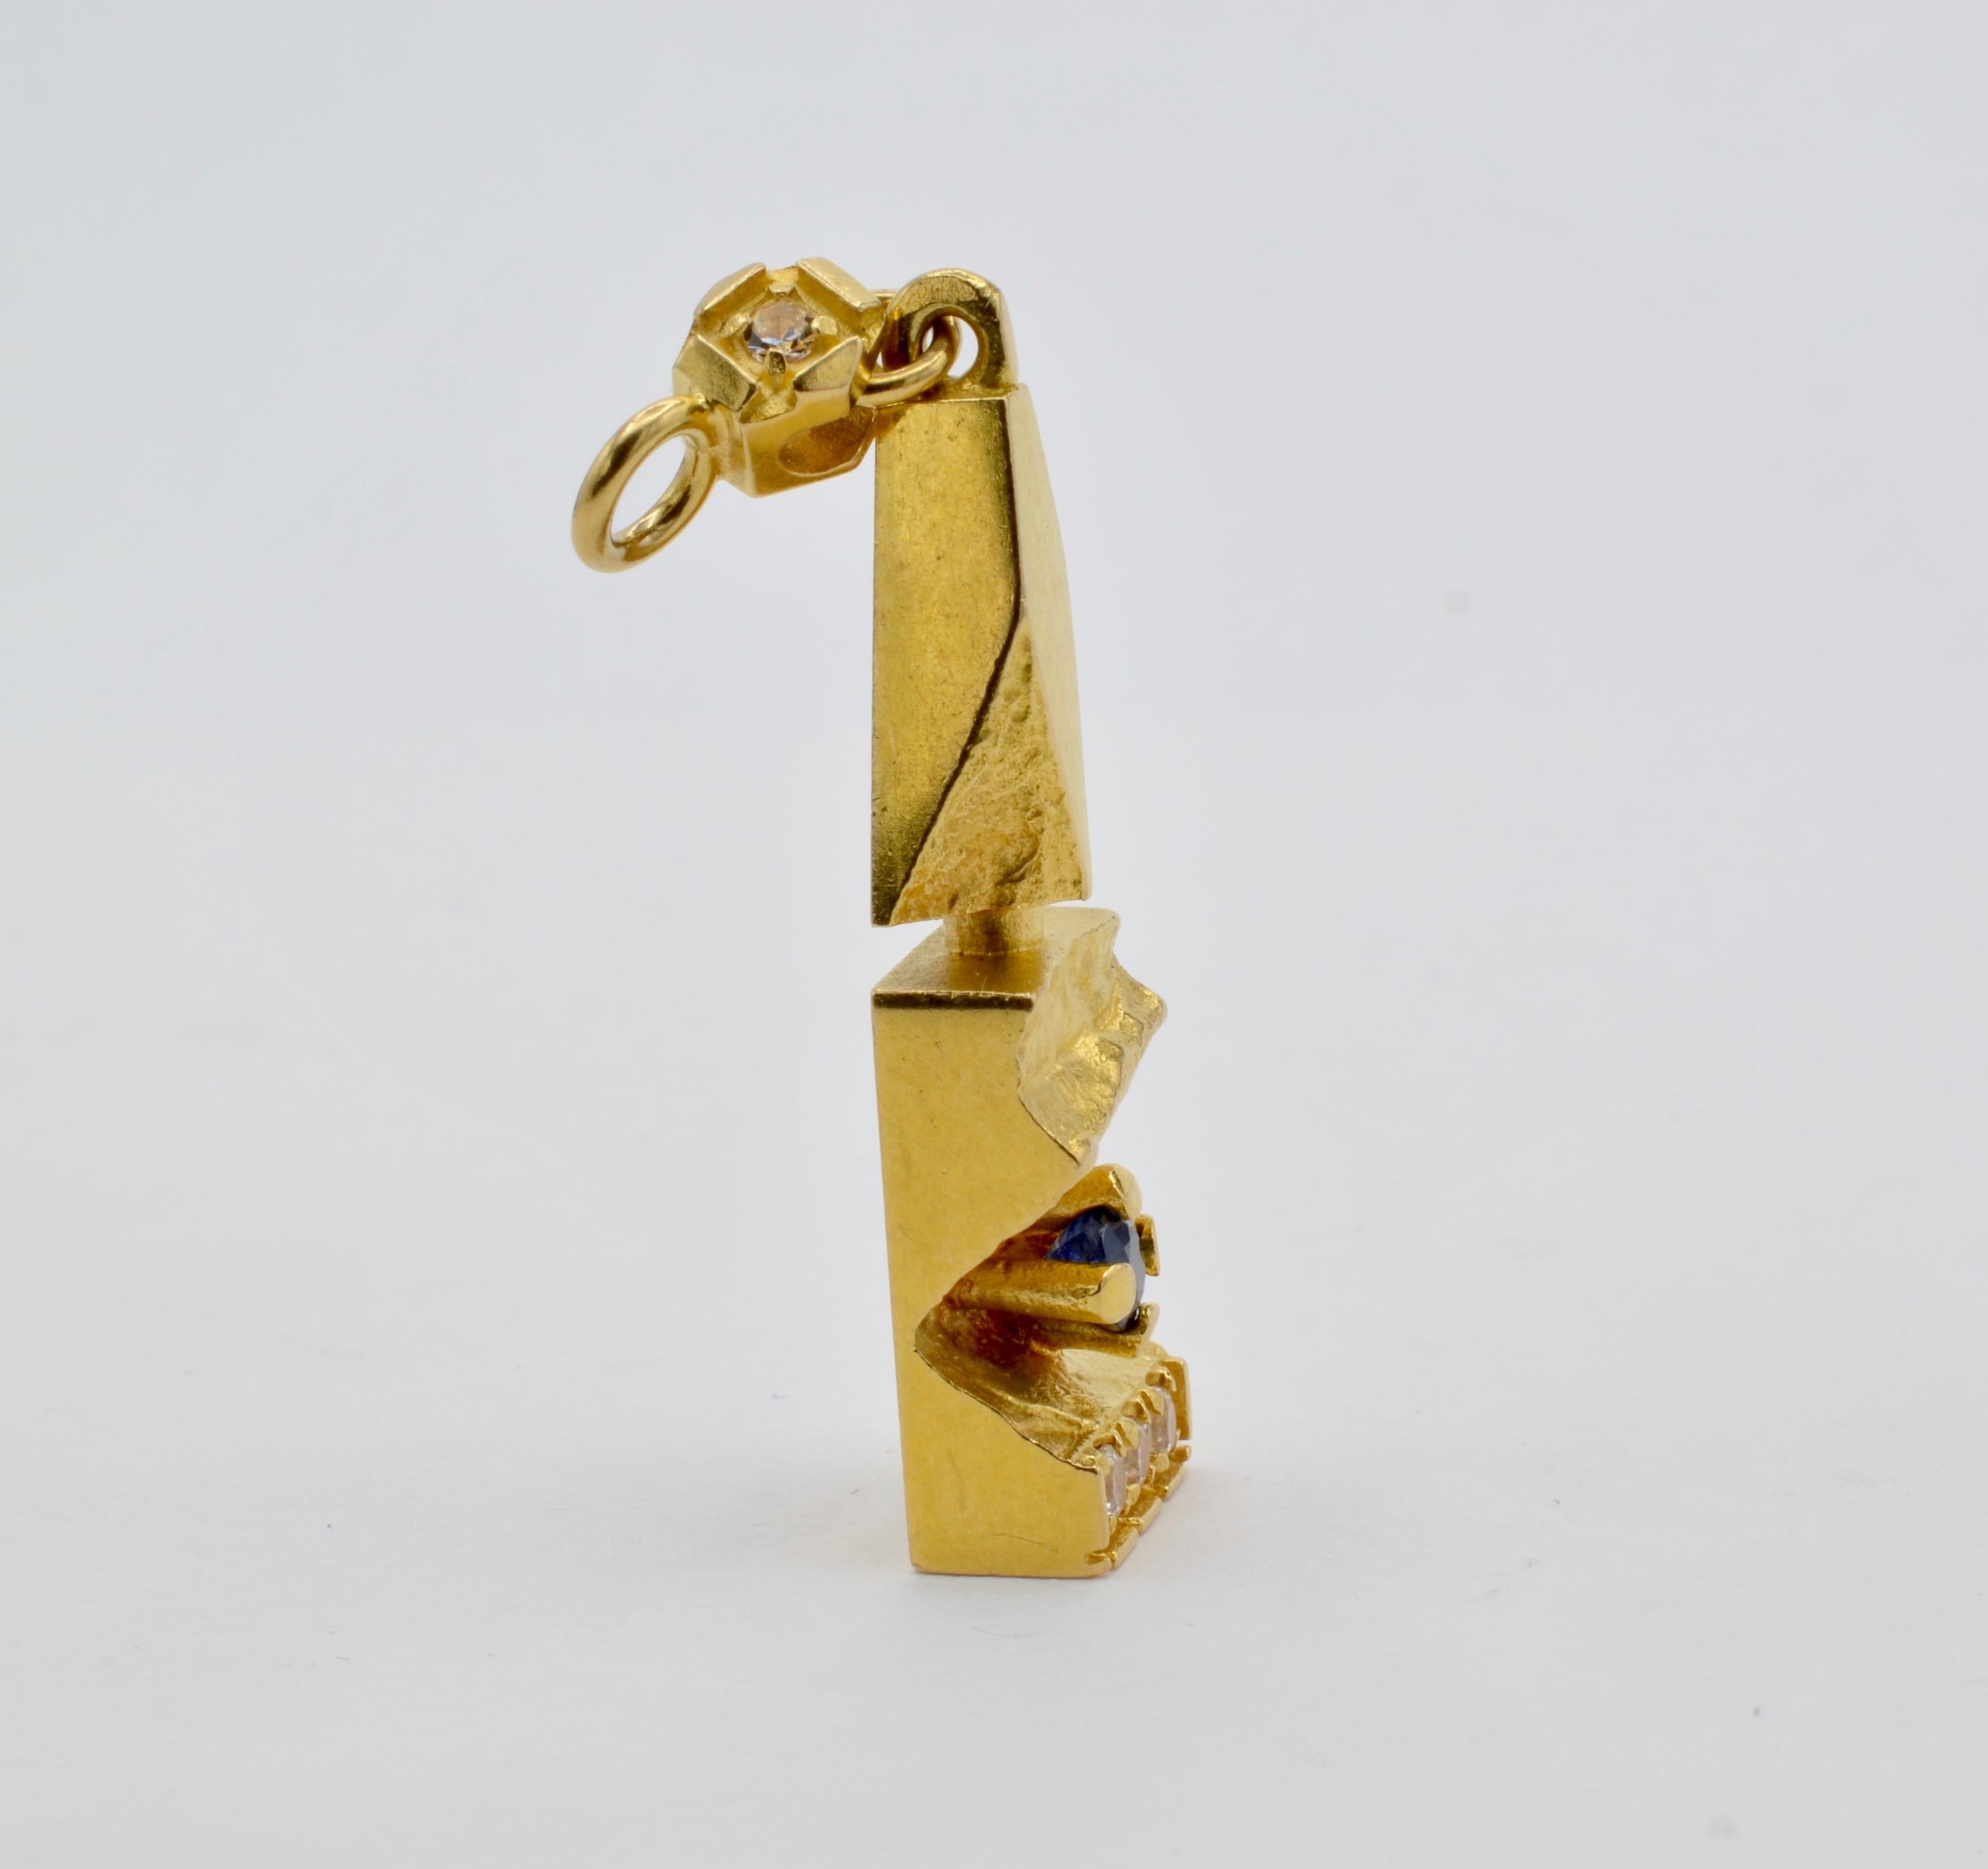 This 1950's vintage and substantial 18K yellow gold Brutalist pendant was made in Finland and is adorned with 4 diamonds (0.13 total carat weight) and a center sapphire (0.25 carats). The architectural design makes an artistic statement with